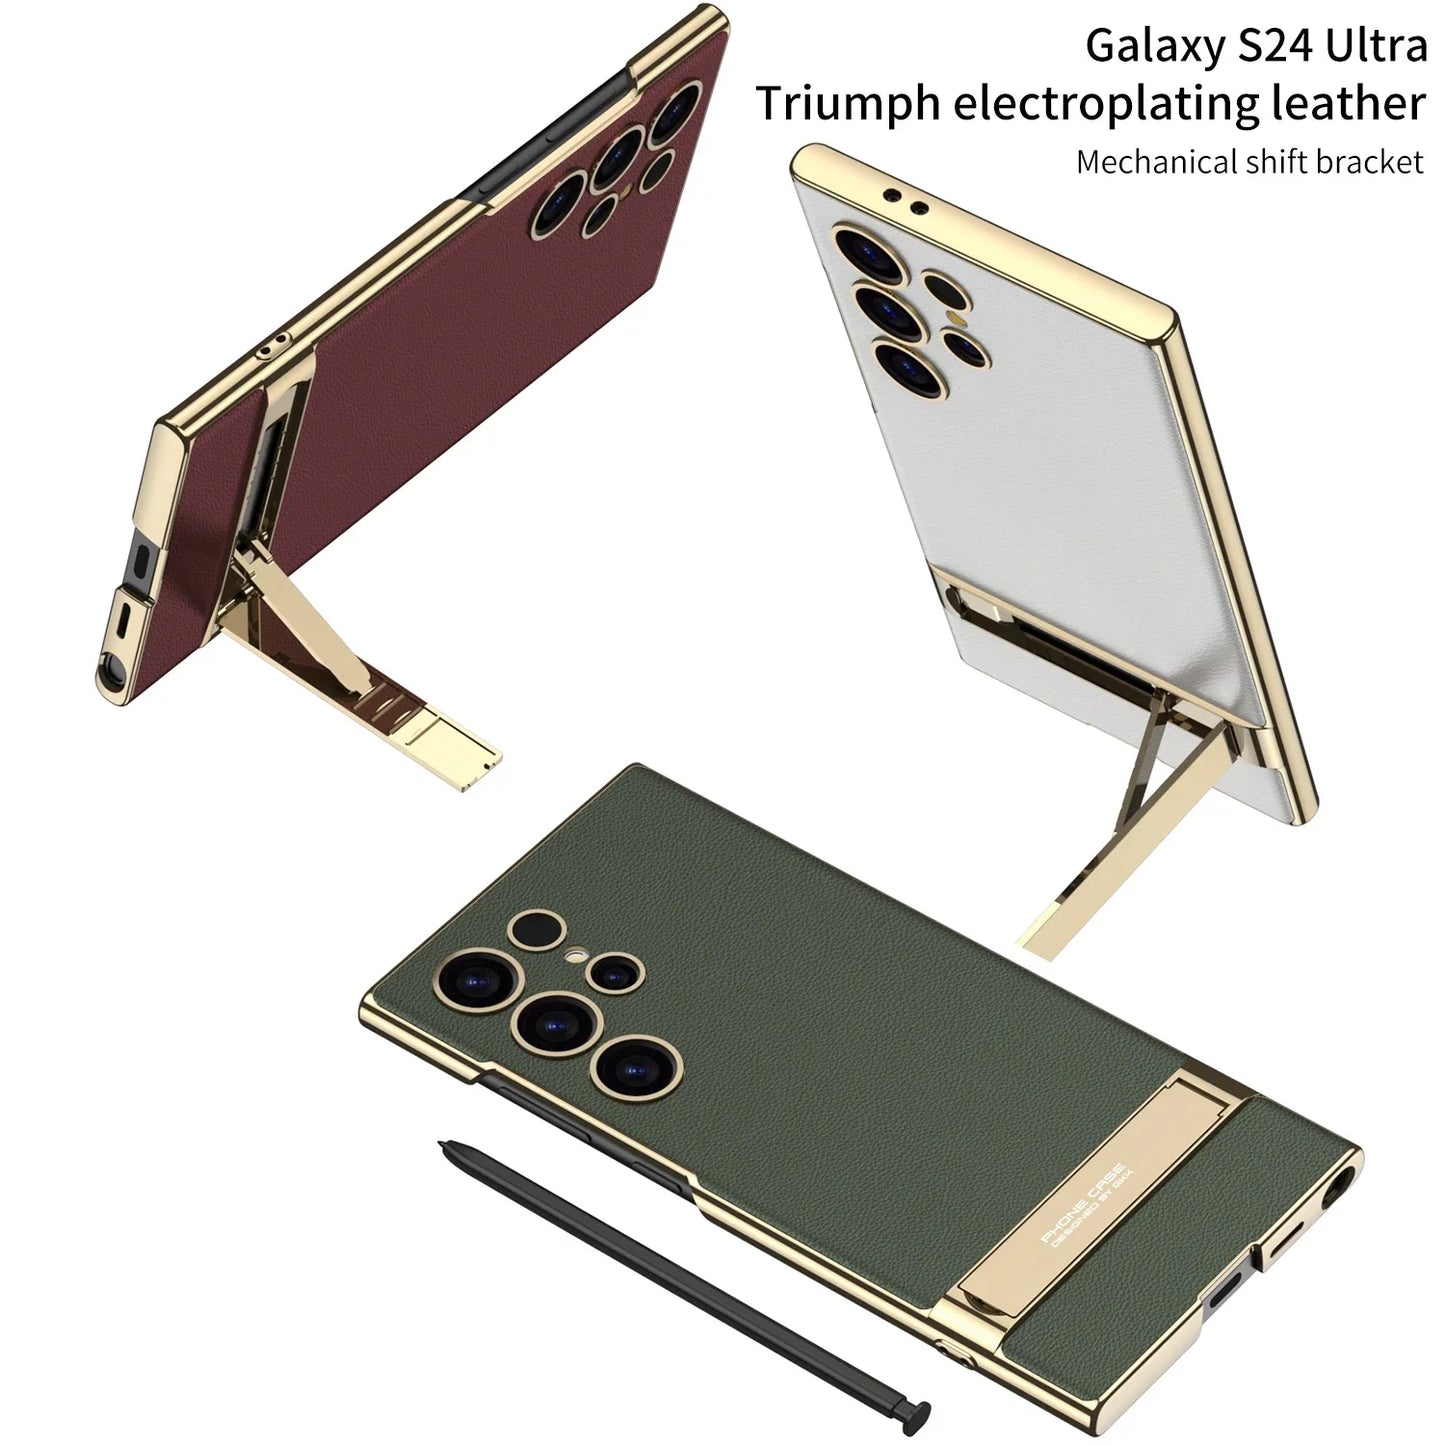 Triumph Electroplating Leather Golden Stand Case For Galaxy S24 Ultra